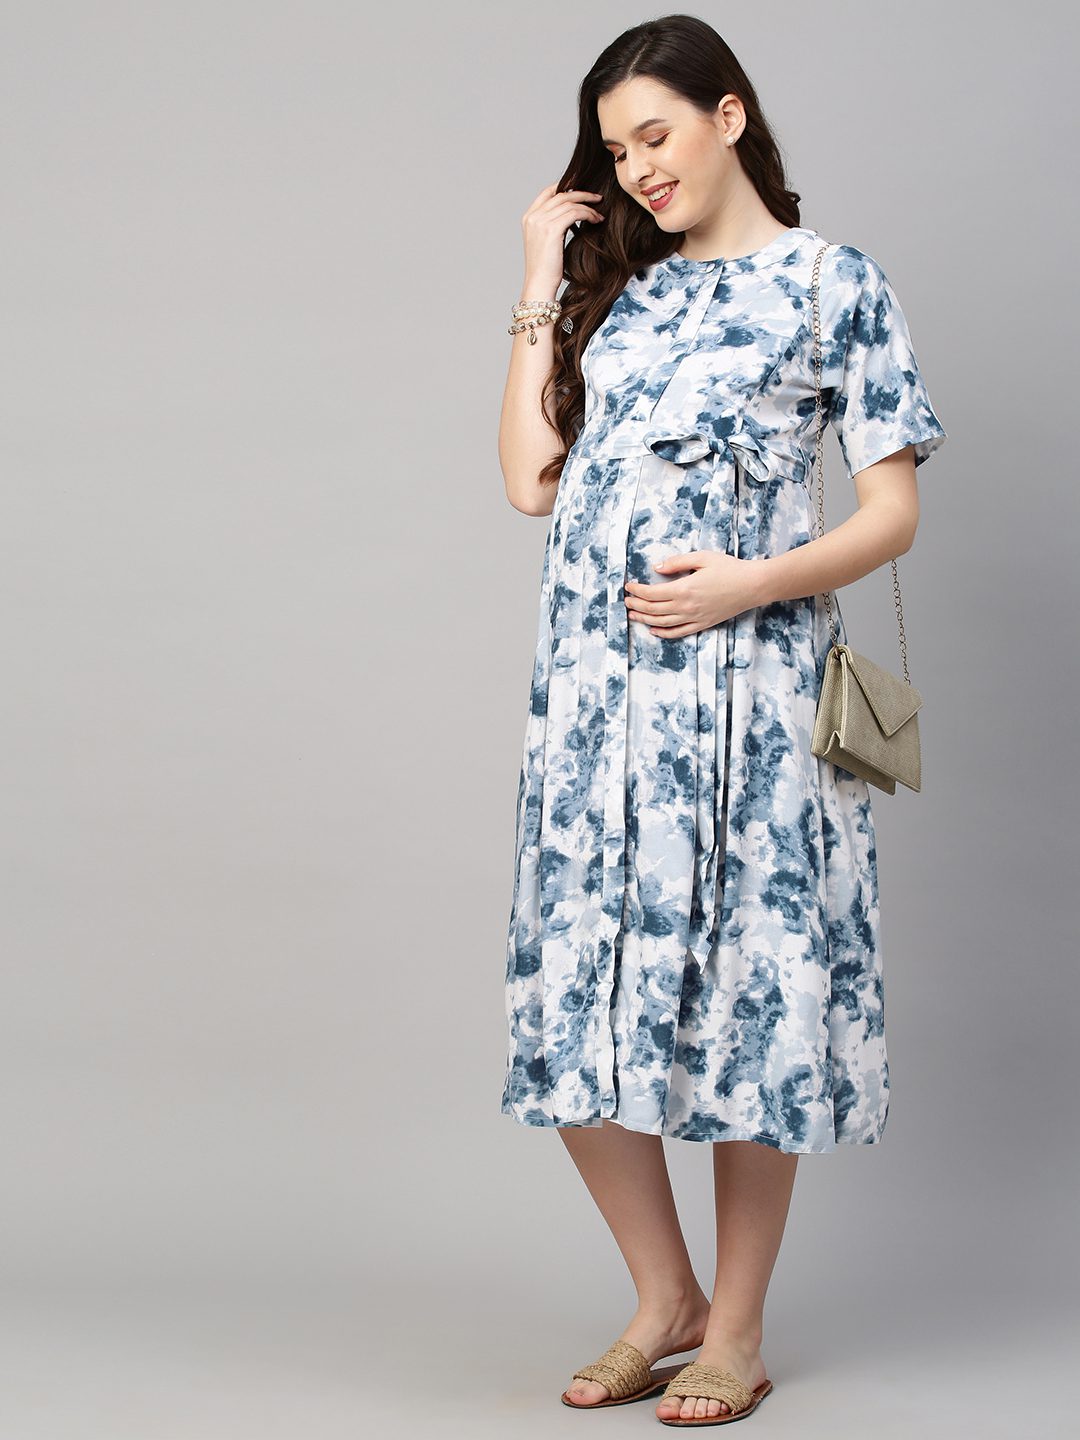 Maternity Wedding Guest Guide: 17 Dresses For Pregnant Babes- Lulus.com  Fashion Blog